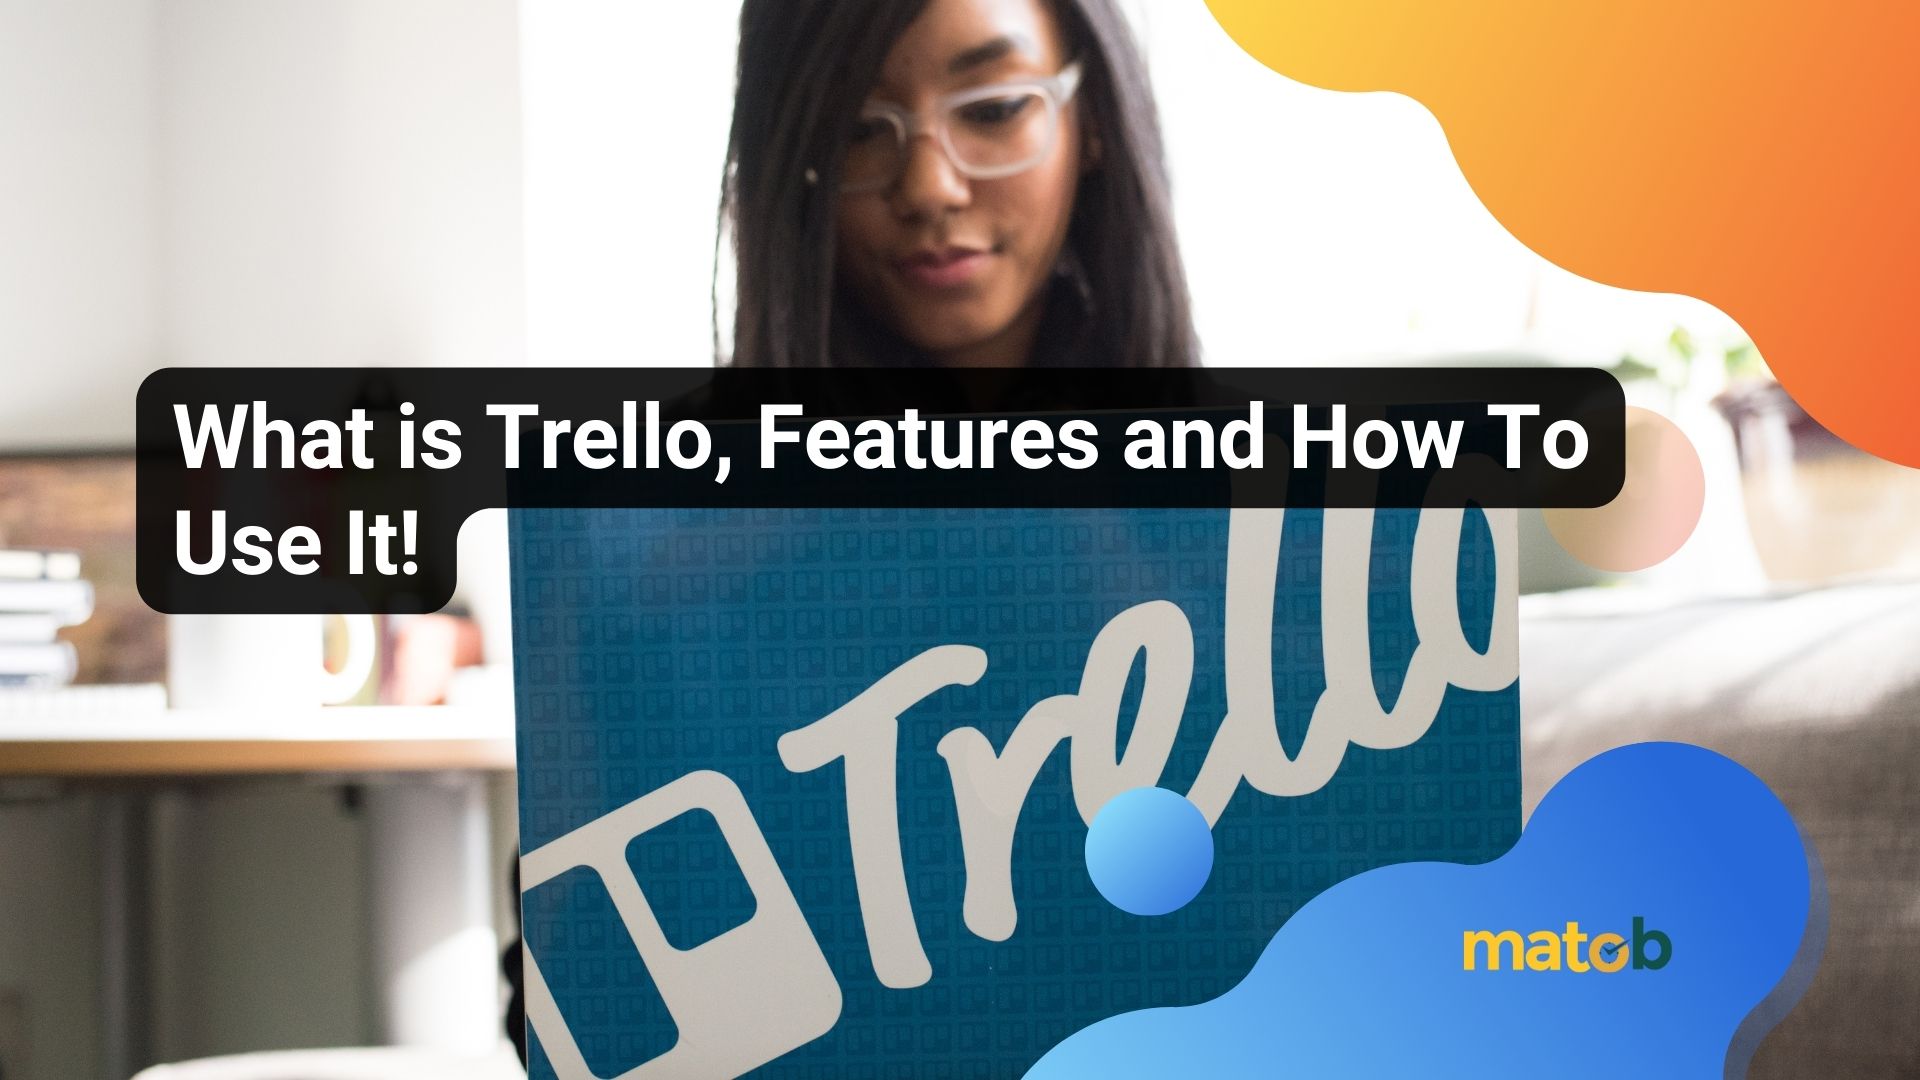 What is Trello, Features and How To Use It!